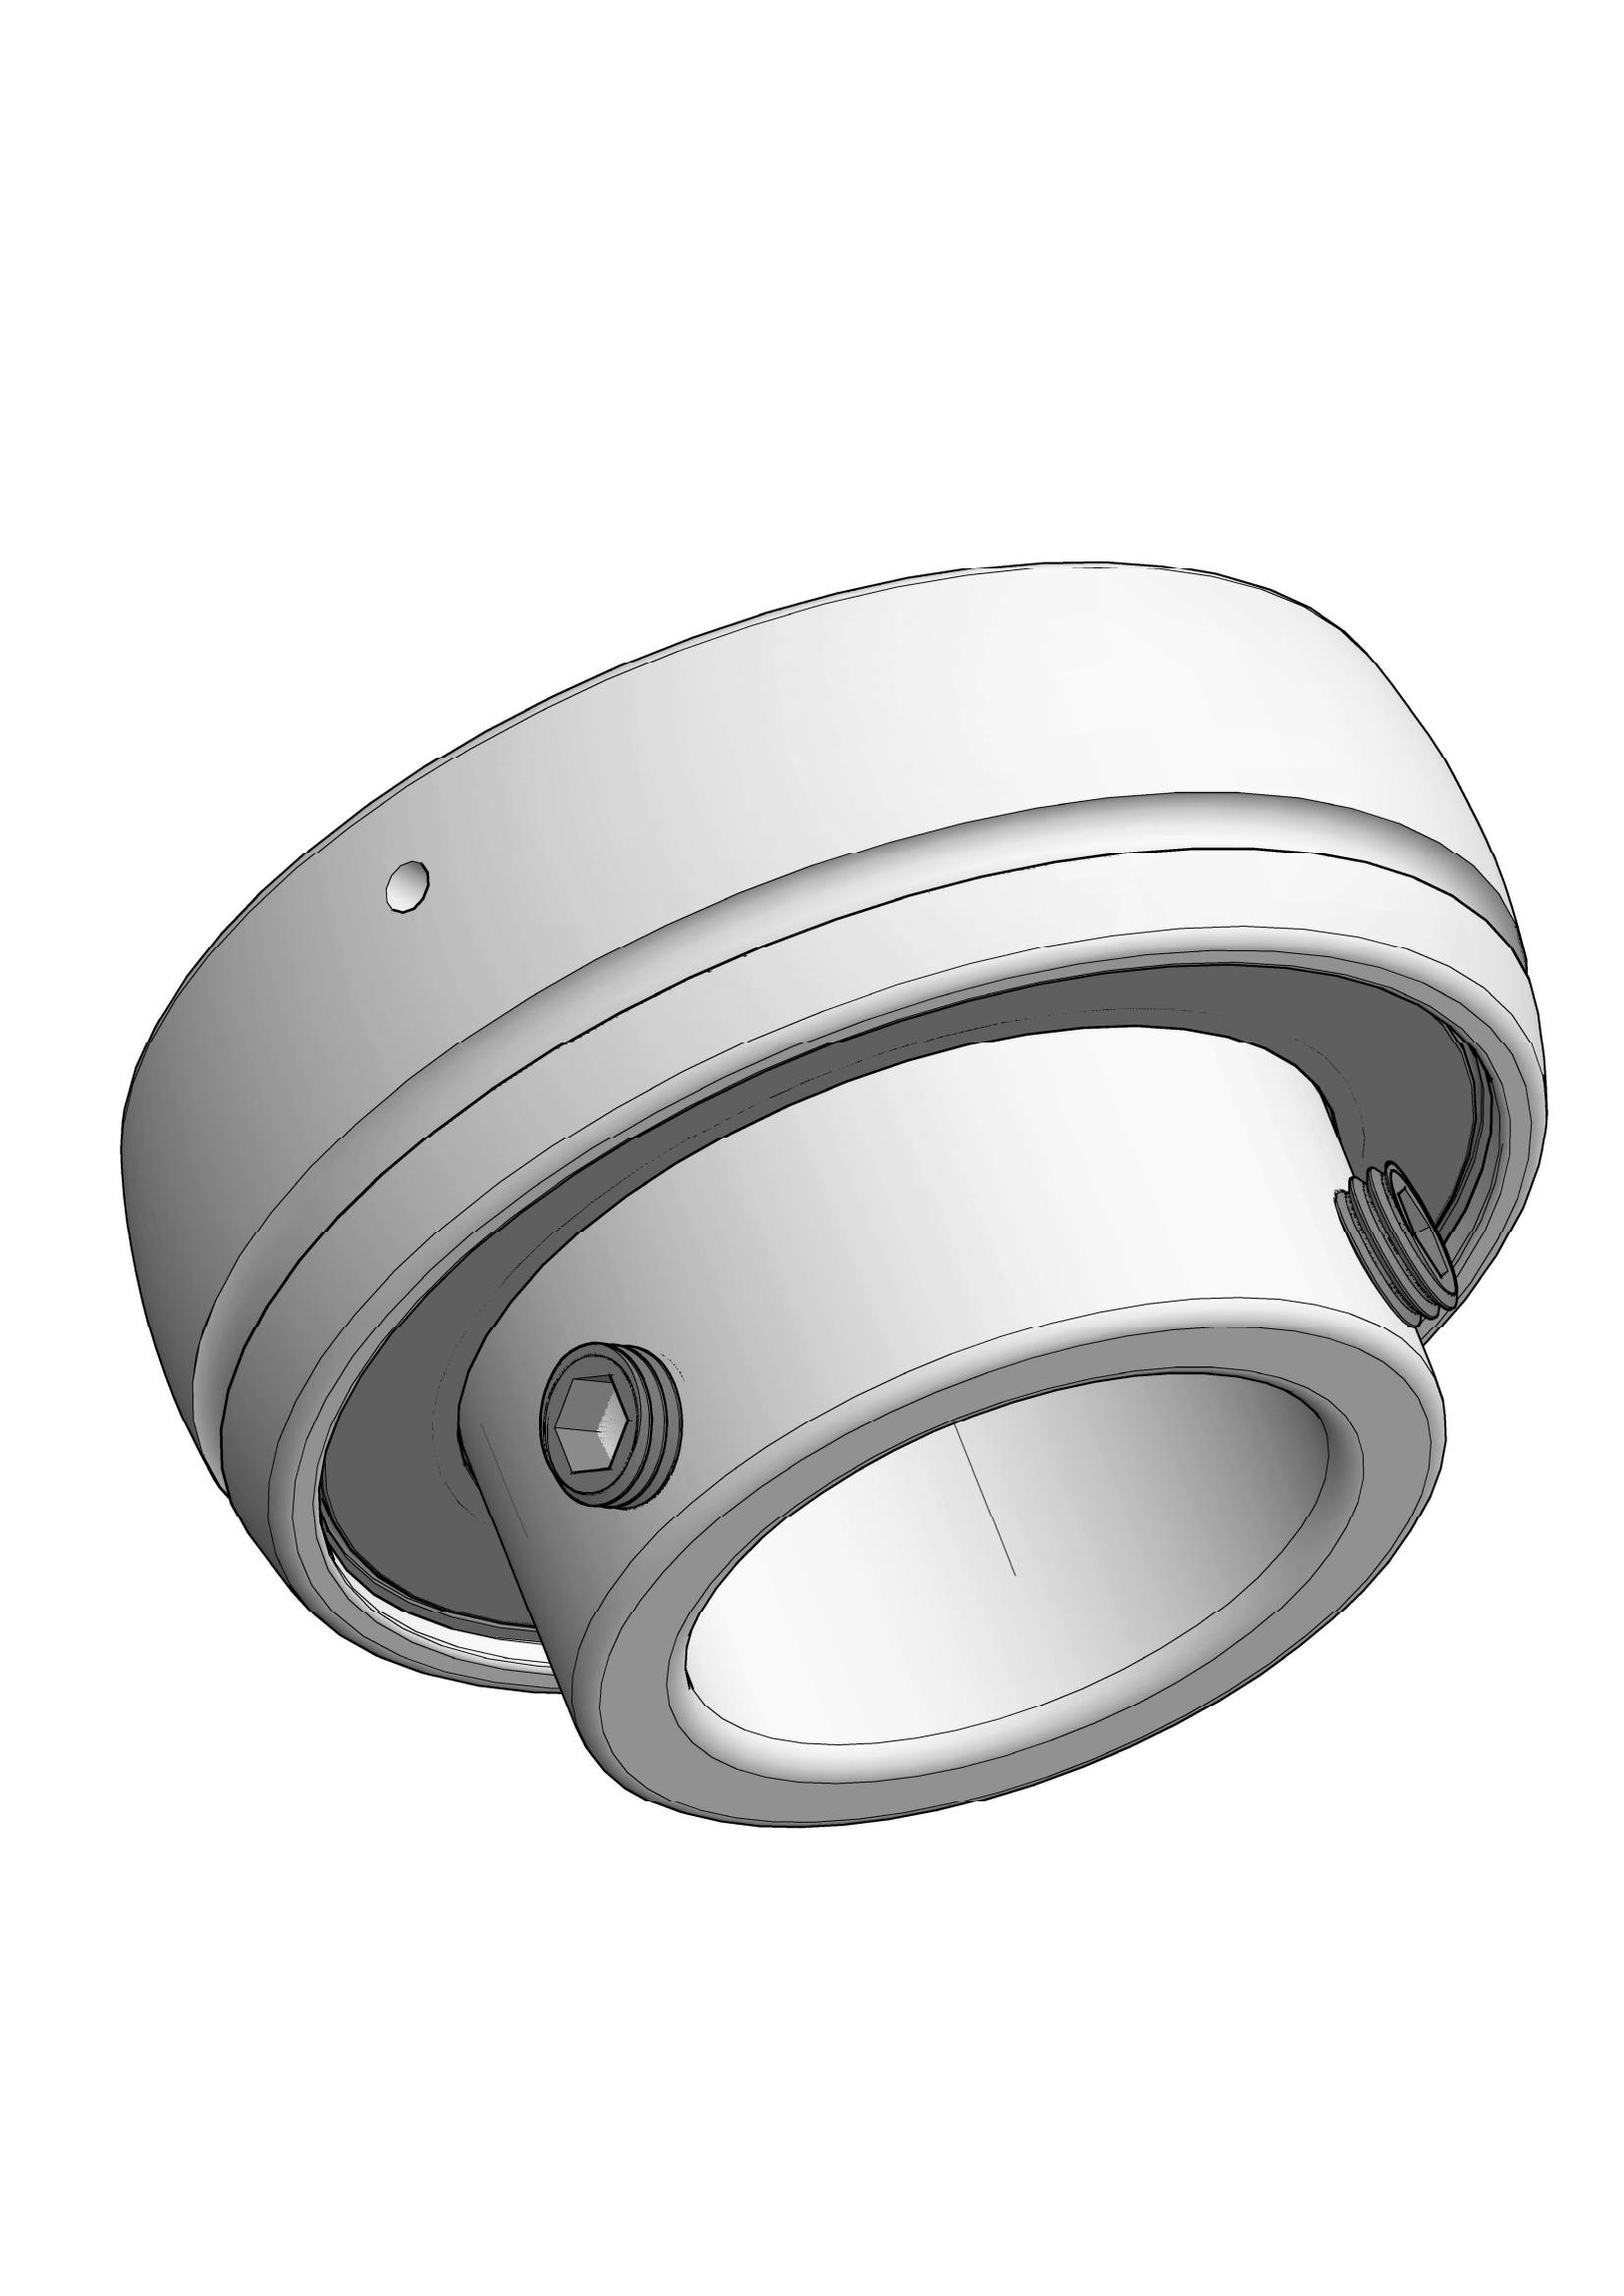 SB202-9 insert ball bearings with Eccentric Collar Lock with 9/16 inch Bore